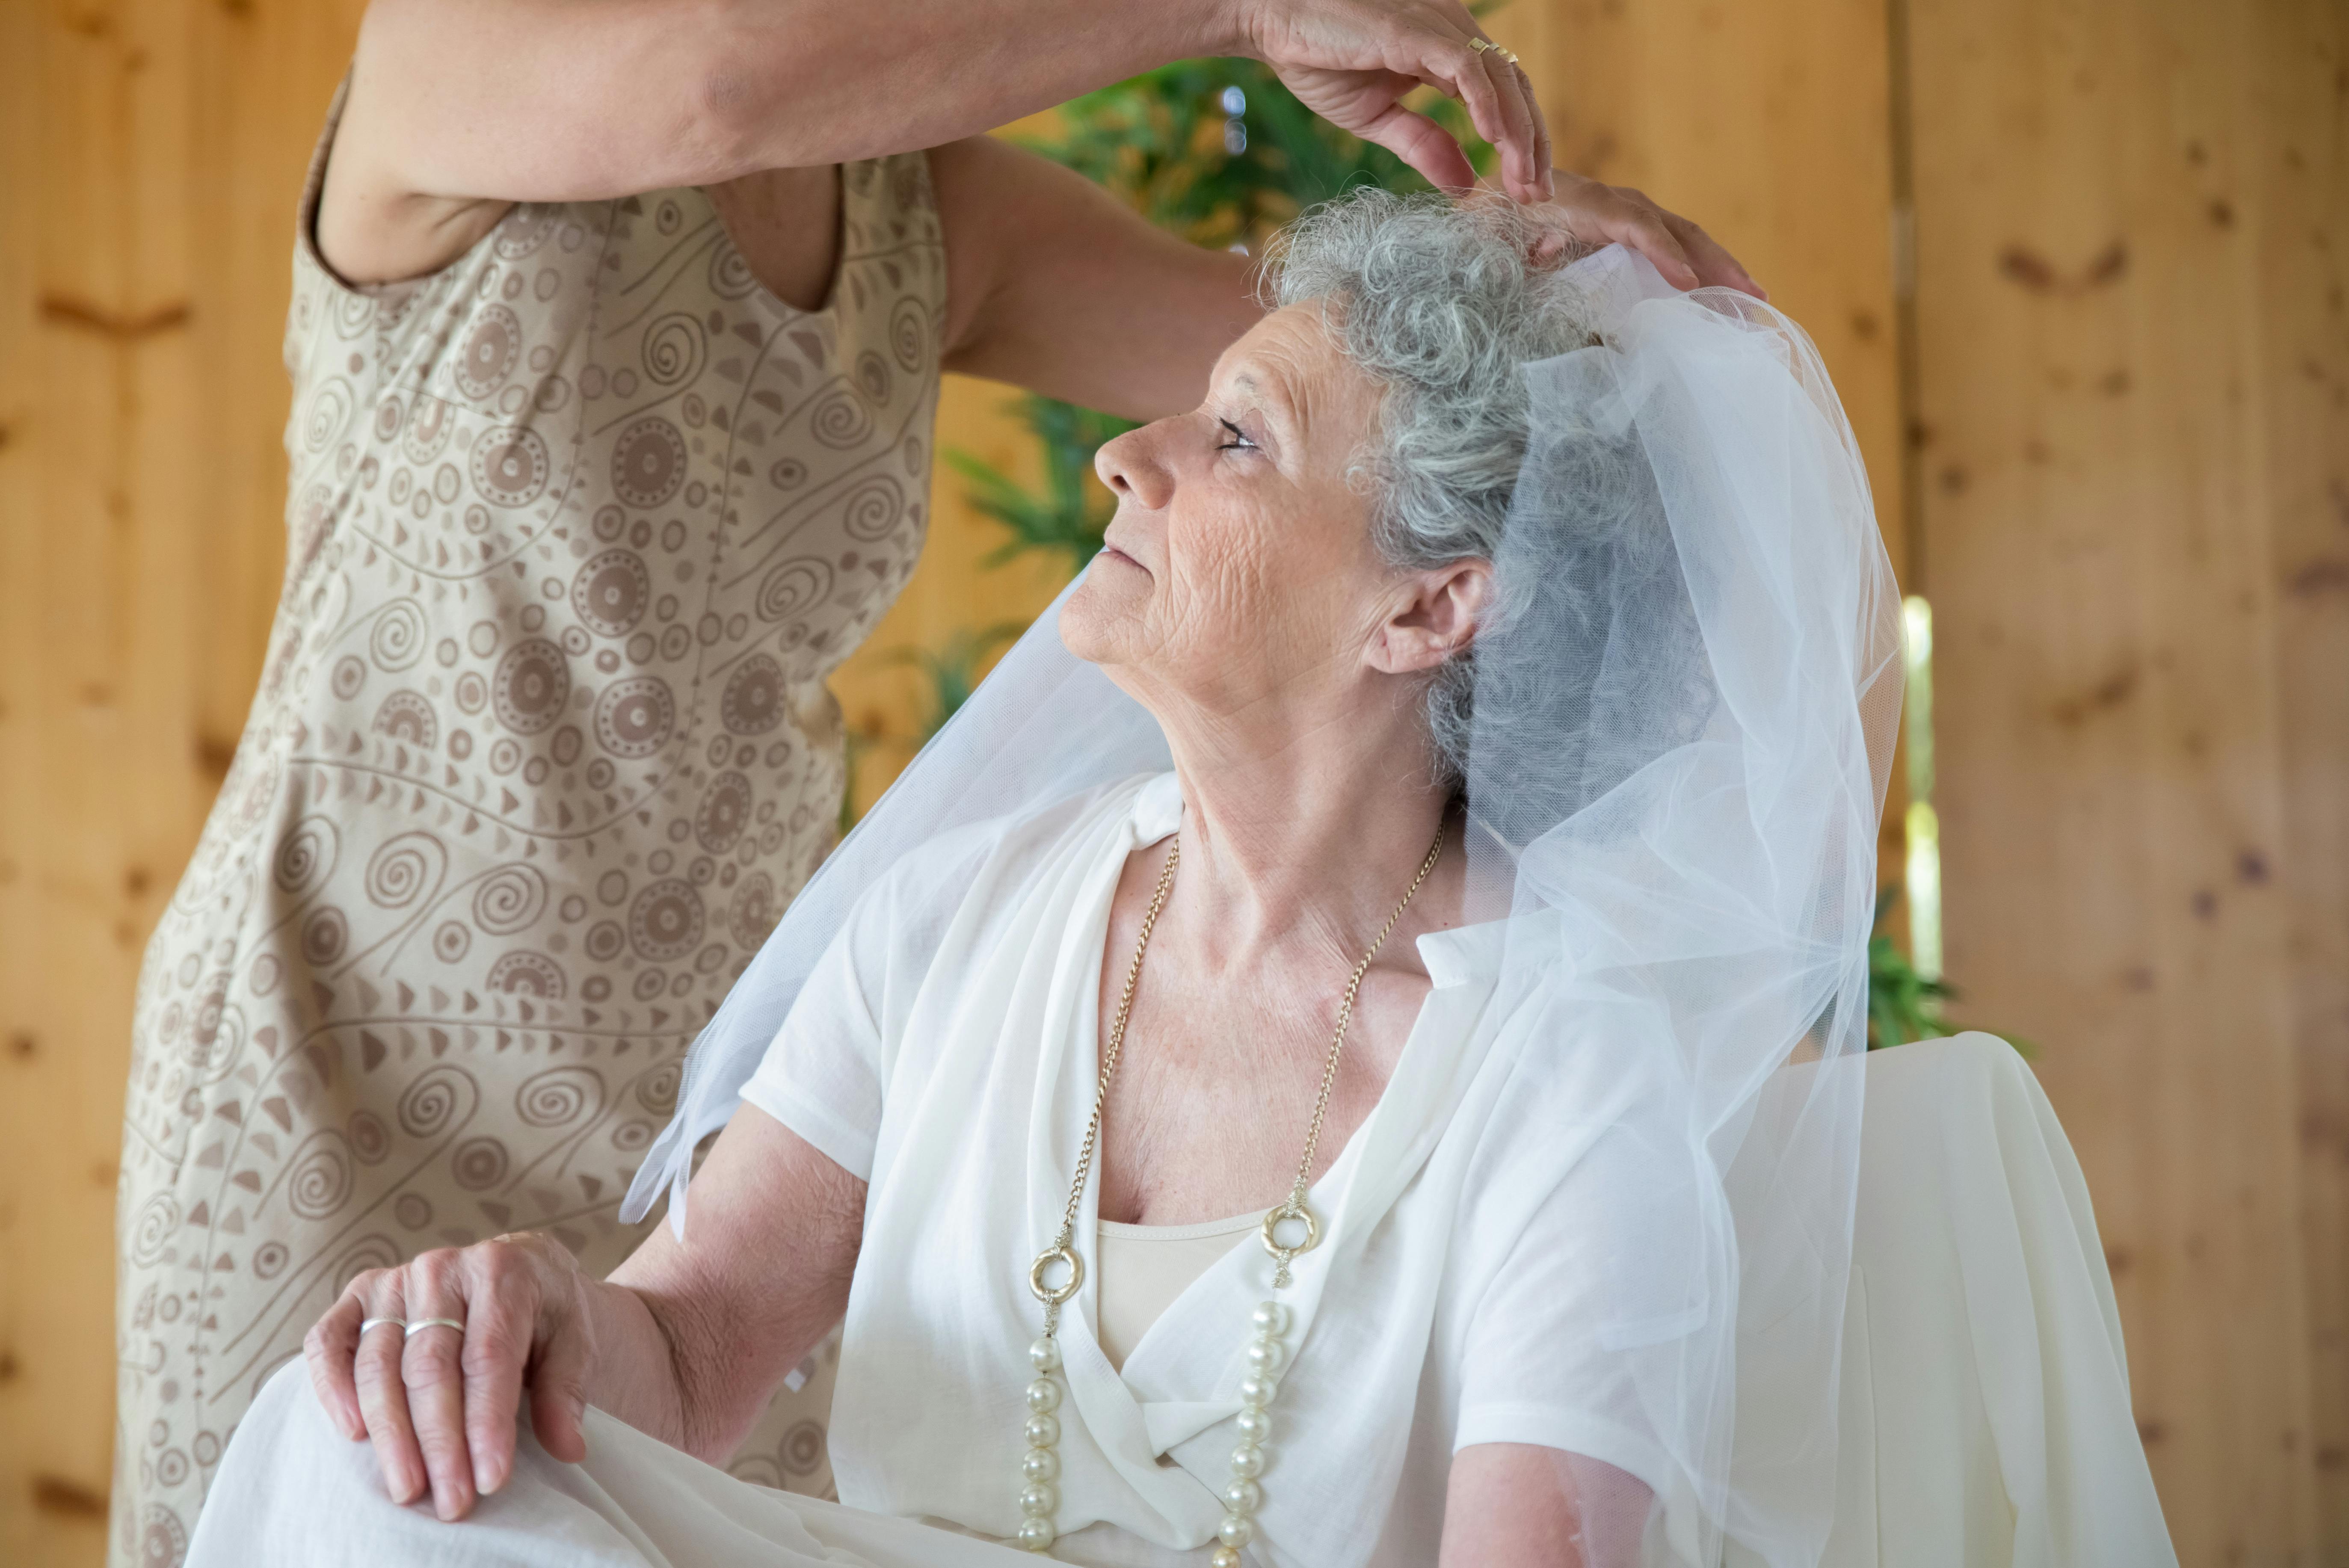 A gray-haired woman wearing a veil | Source: Pexels